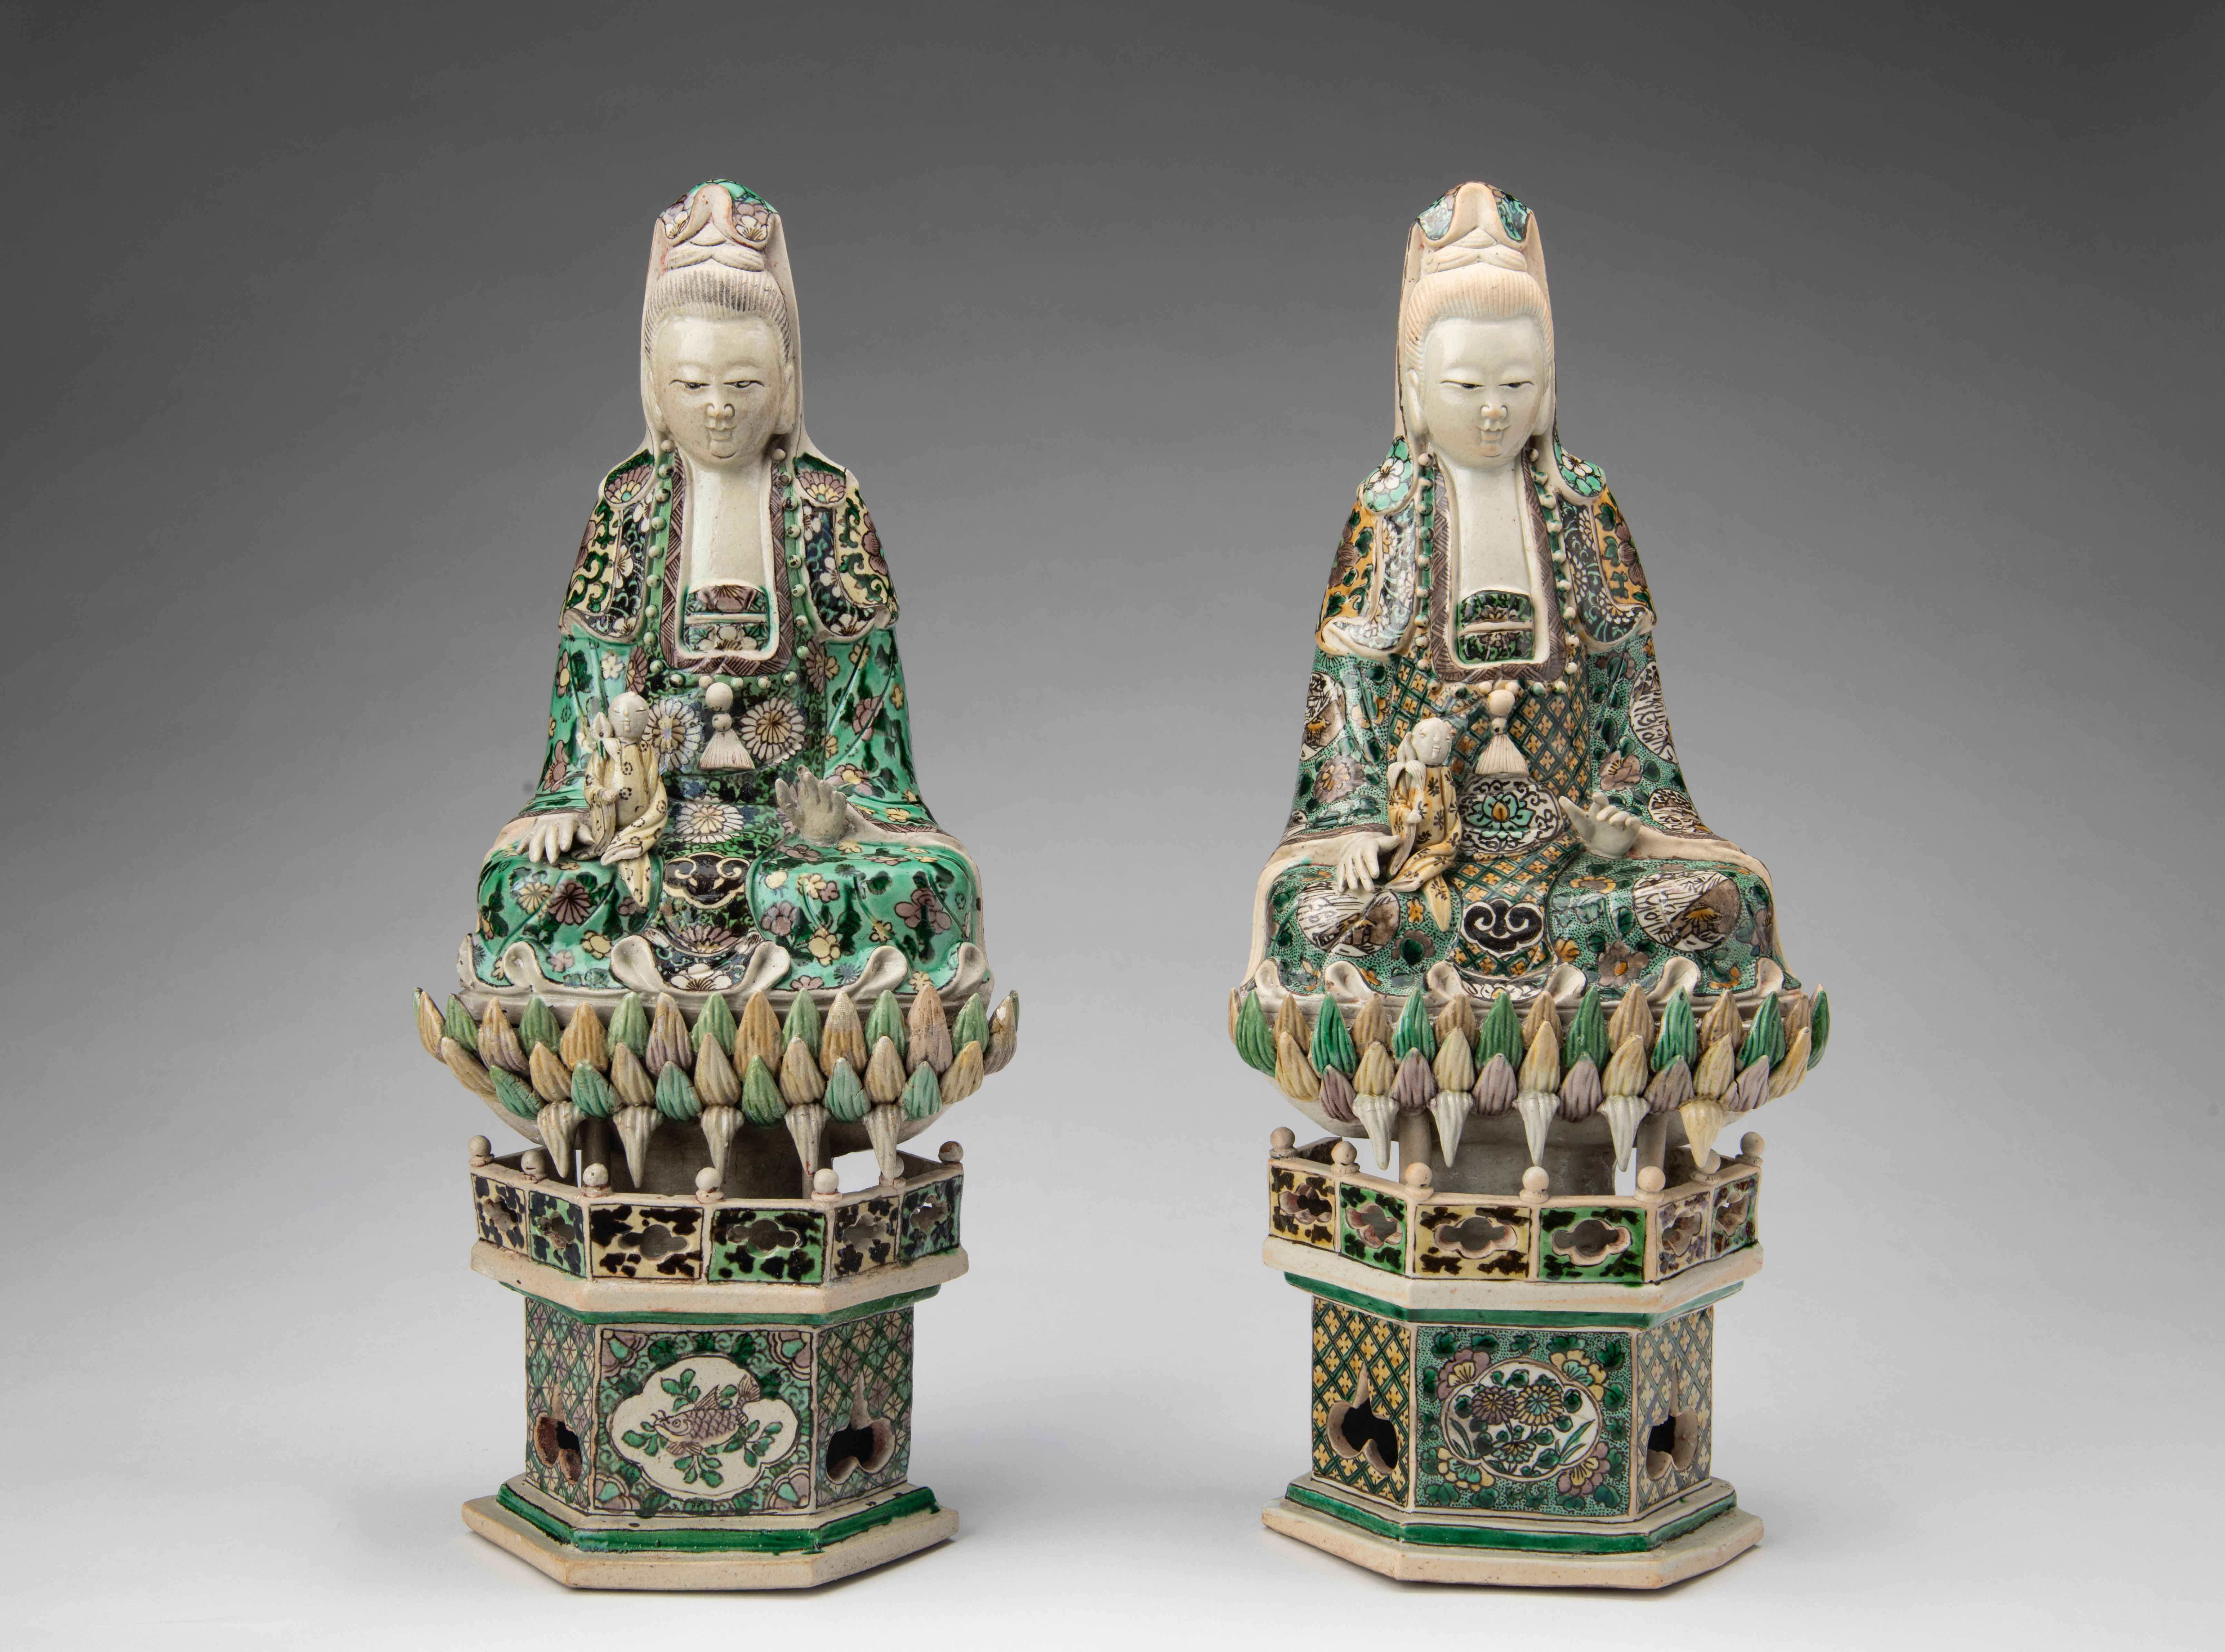 Guanyin, Bodhisattva of Compassion, about 1700, China, Qing dynasty (1644–1911), Kangxi reign (1662–1722), enamel on porcelain, 14 1/2 x 6 1/4 x 4 5/16 in. (36.83 x 15.88 x 10.95 cm); 14 5/8 x 6 1/4 x 4 1/4 in. (37.15 x 15.88 x 10.8 cm). Taft Museum of Art, Cincinnati, Ohio. Bequest of Charles Phelps Taft and Anna Sinton Taft, 1931.44, 49